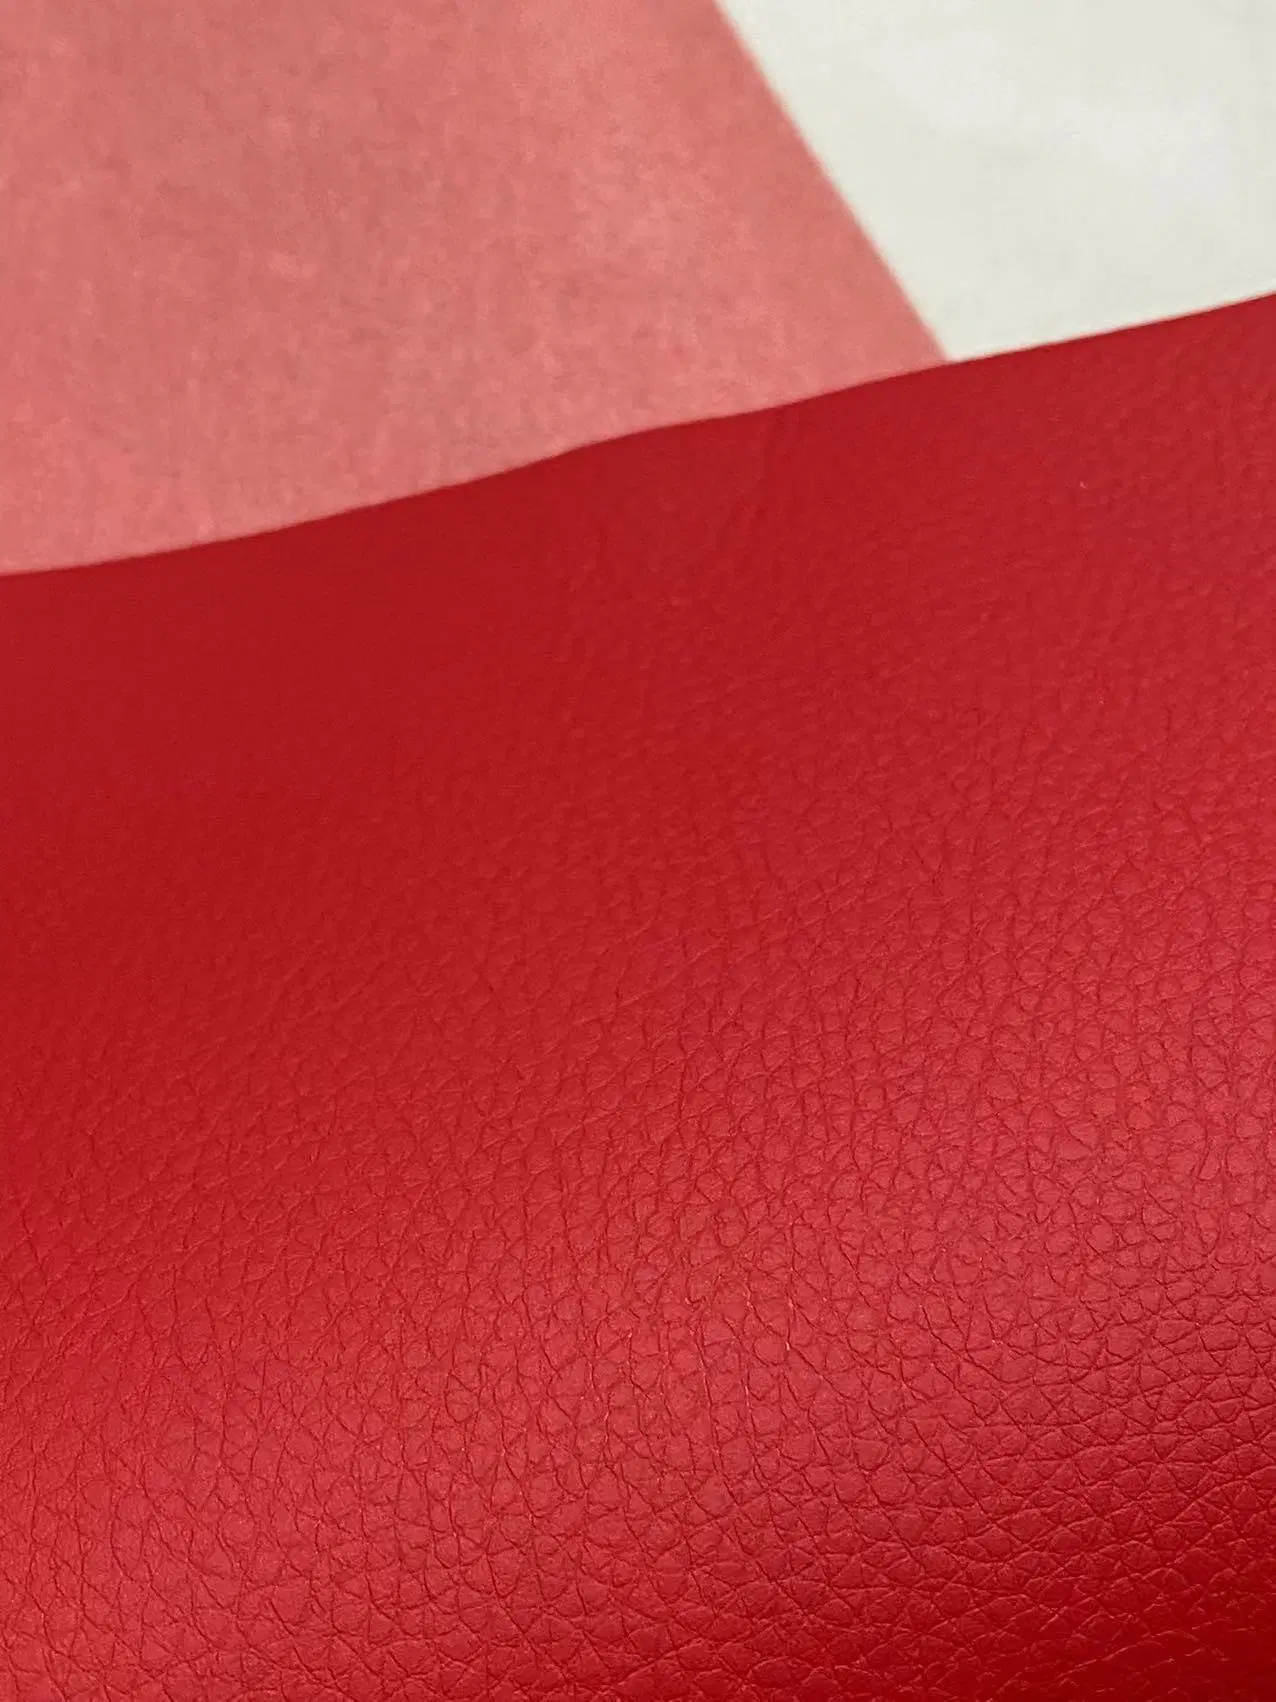 Bags Upholstery Fabric Microfibre Leather Huafon High Quality Microfiber Leather Goods Reinforcement Nonwoven Base Microfiber Microfibre Leather